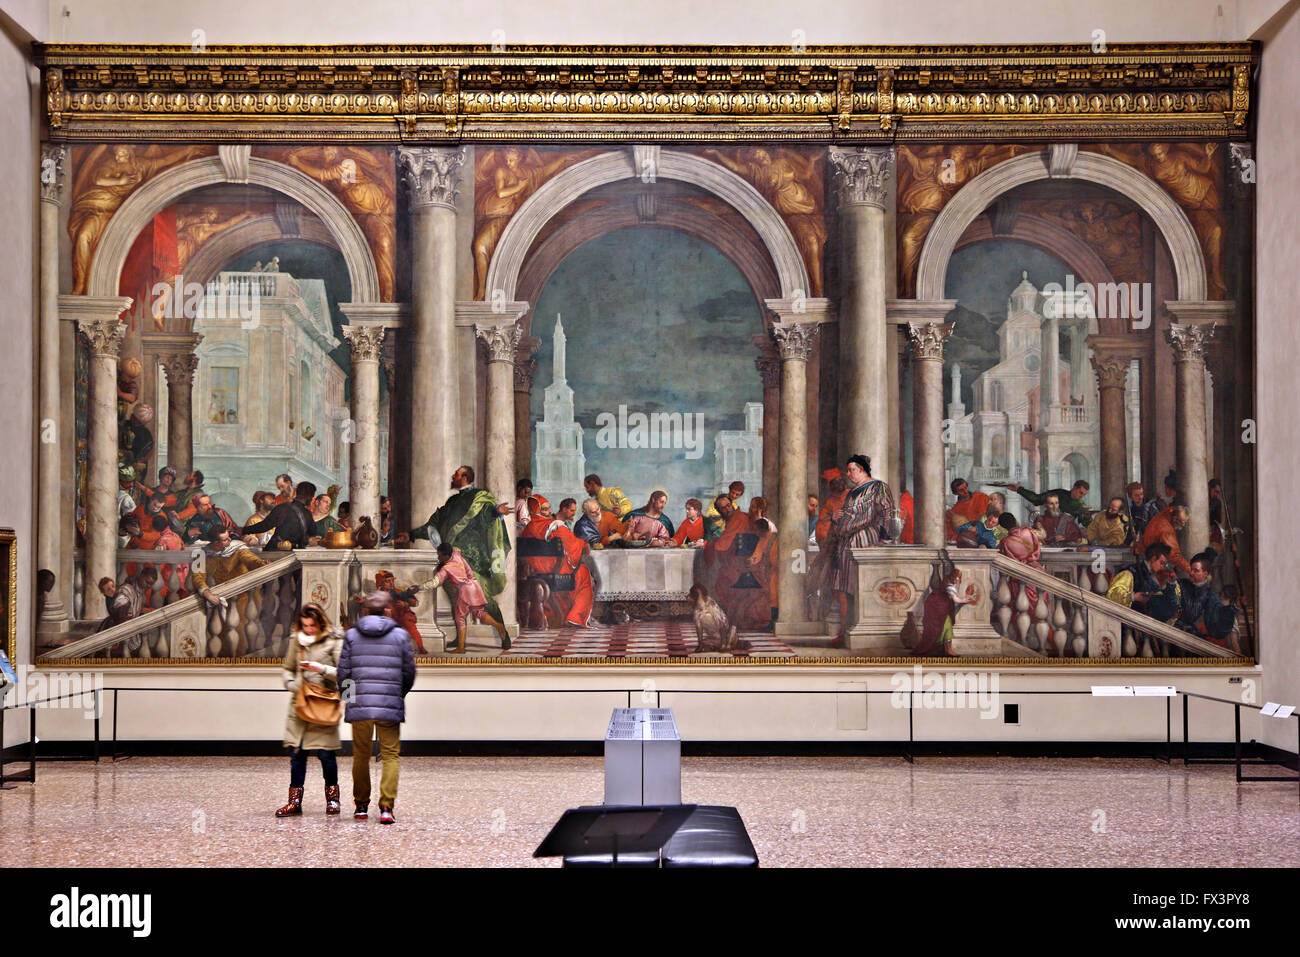 Paolo Veronese's 'Feast in the House of Levi' in Gallerie dell'Accademia, Venezia (Venice), Italy. Stock Photo